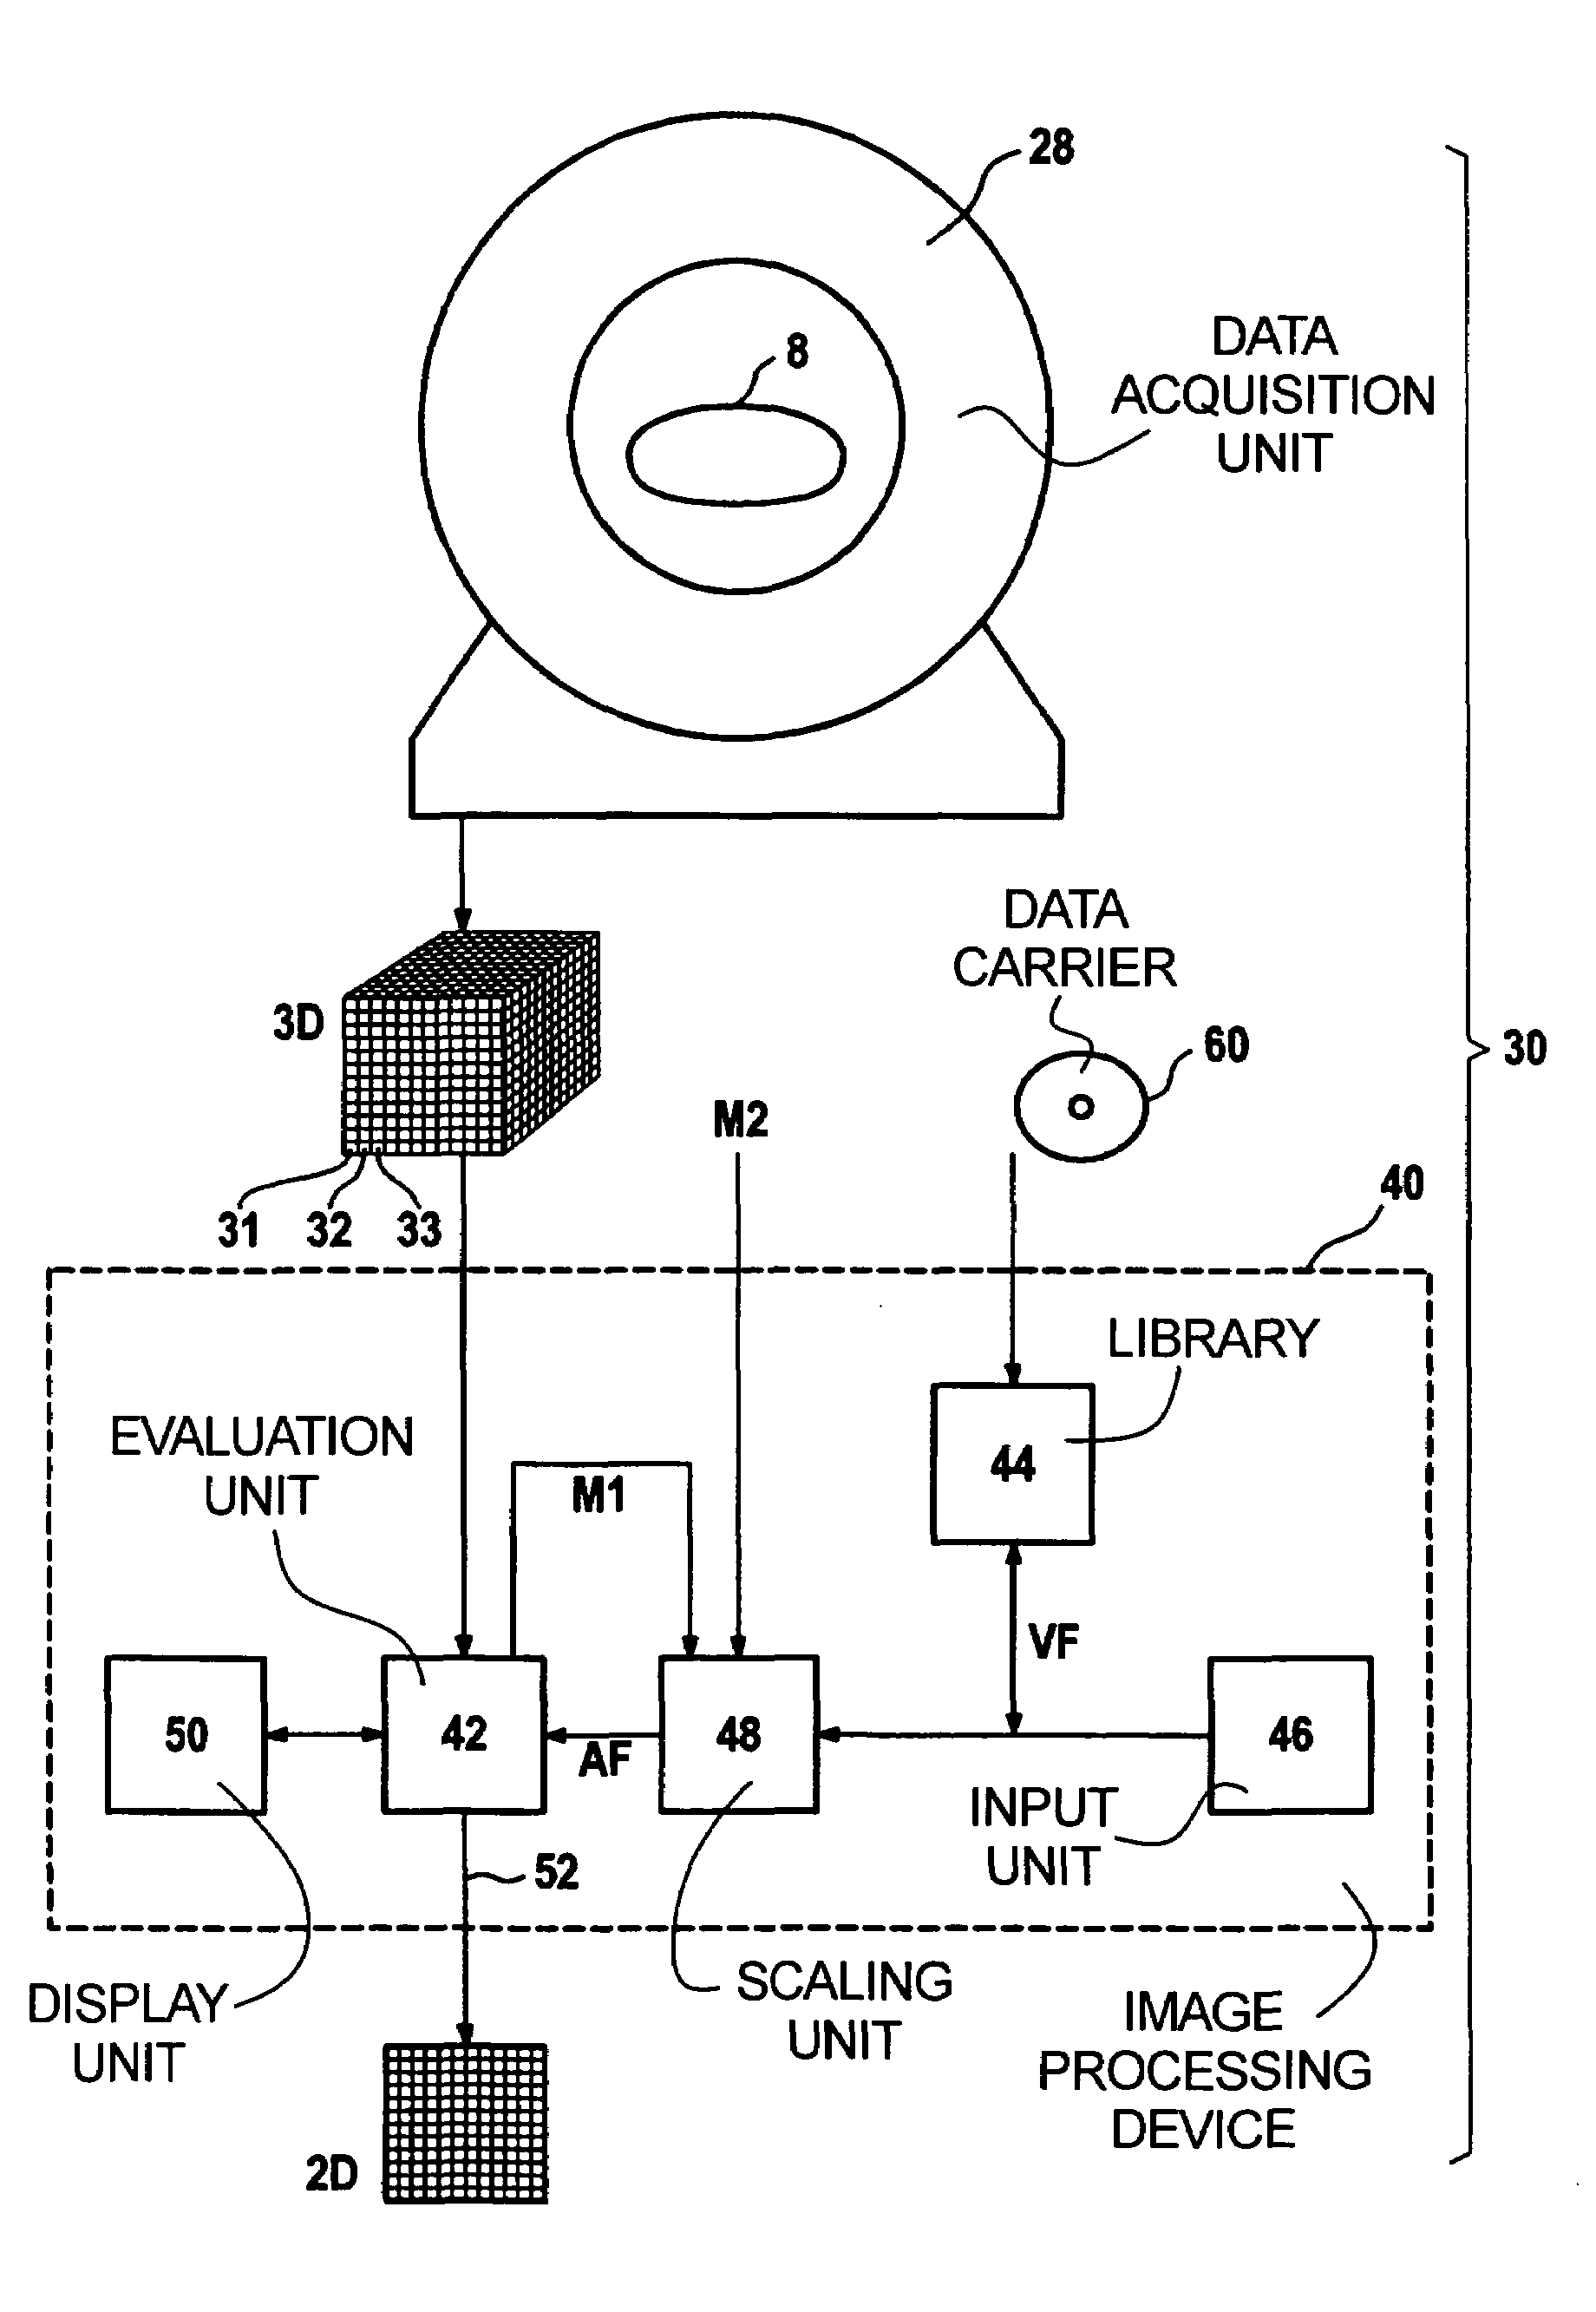 Medical tomography apparatus for generating a 2D image from a 3D dataset of a tomographic data